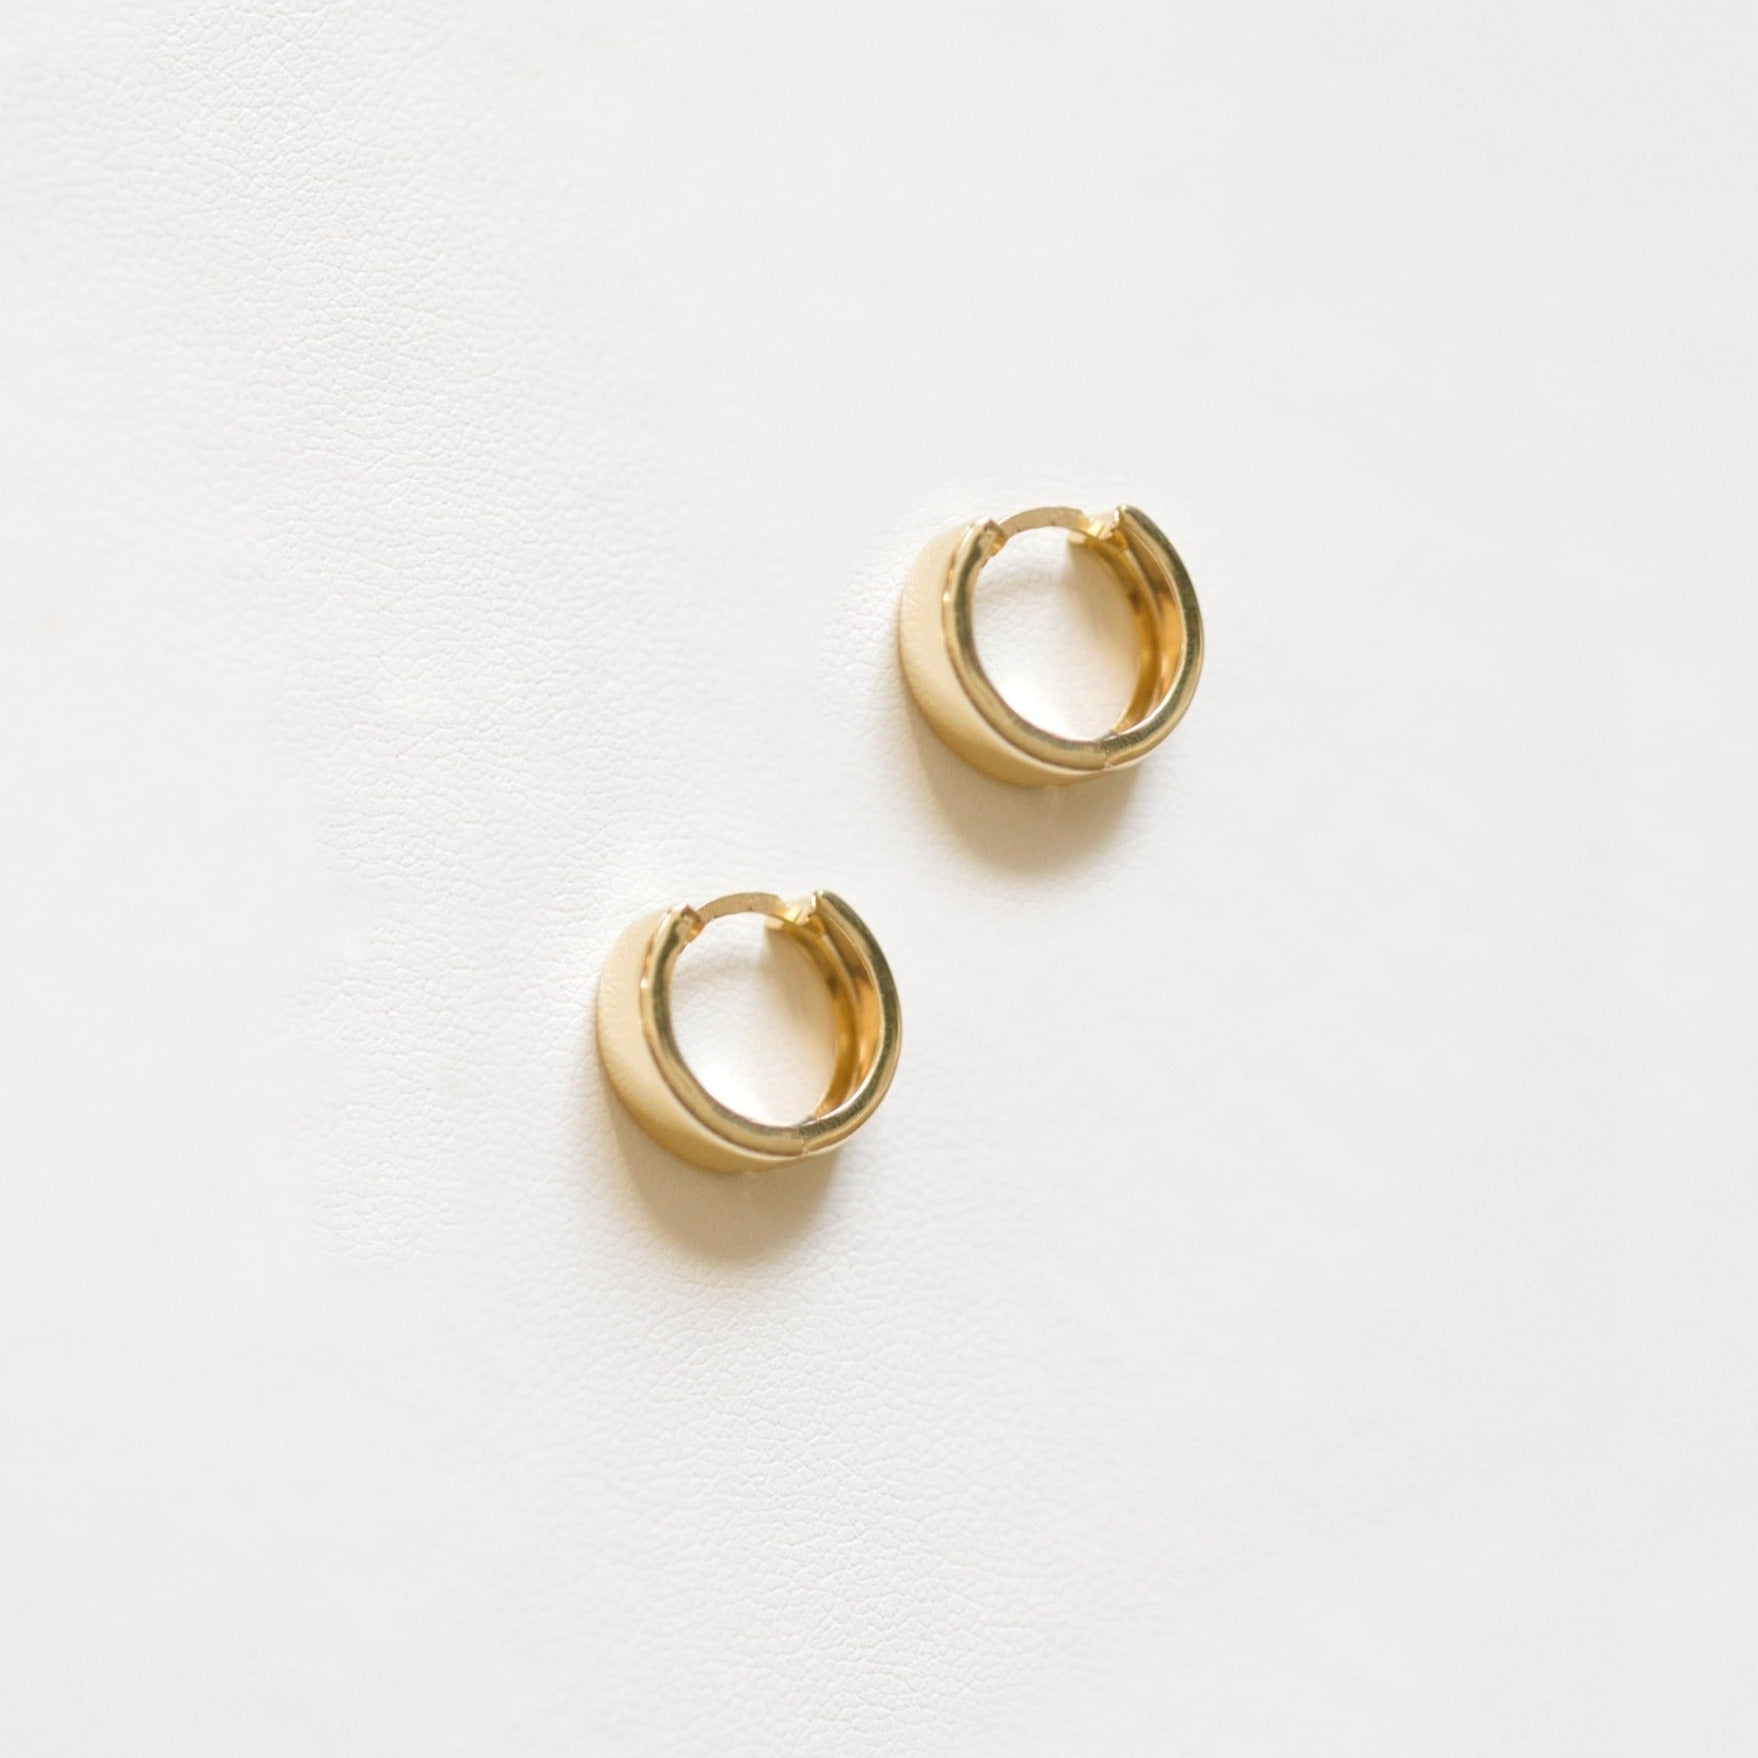 Gold huggie hoops are the ultimate classic earring. These are 14k yellow gold.